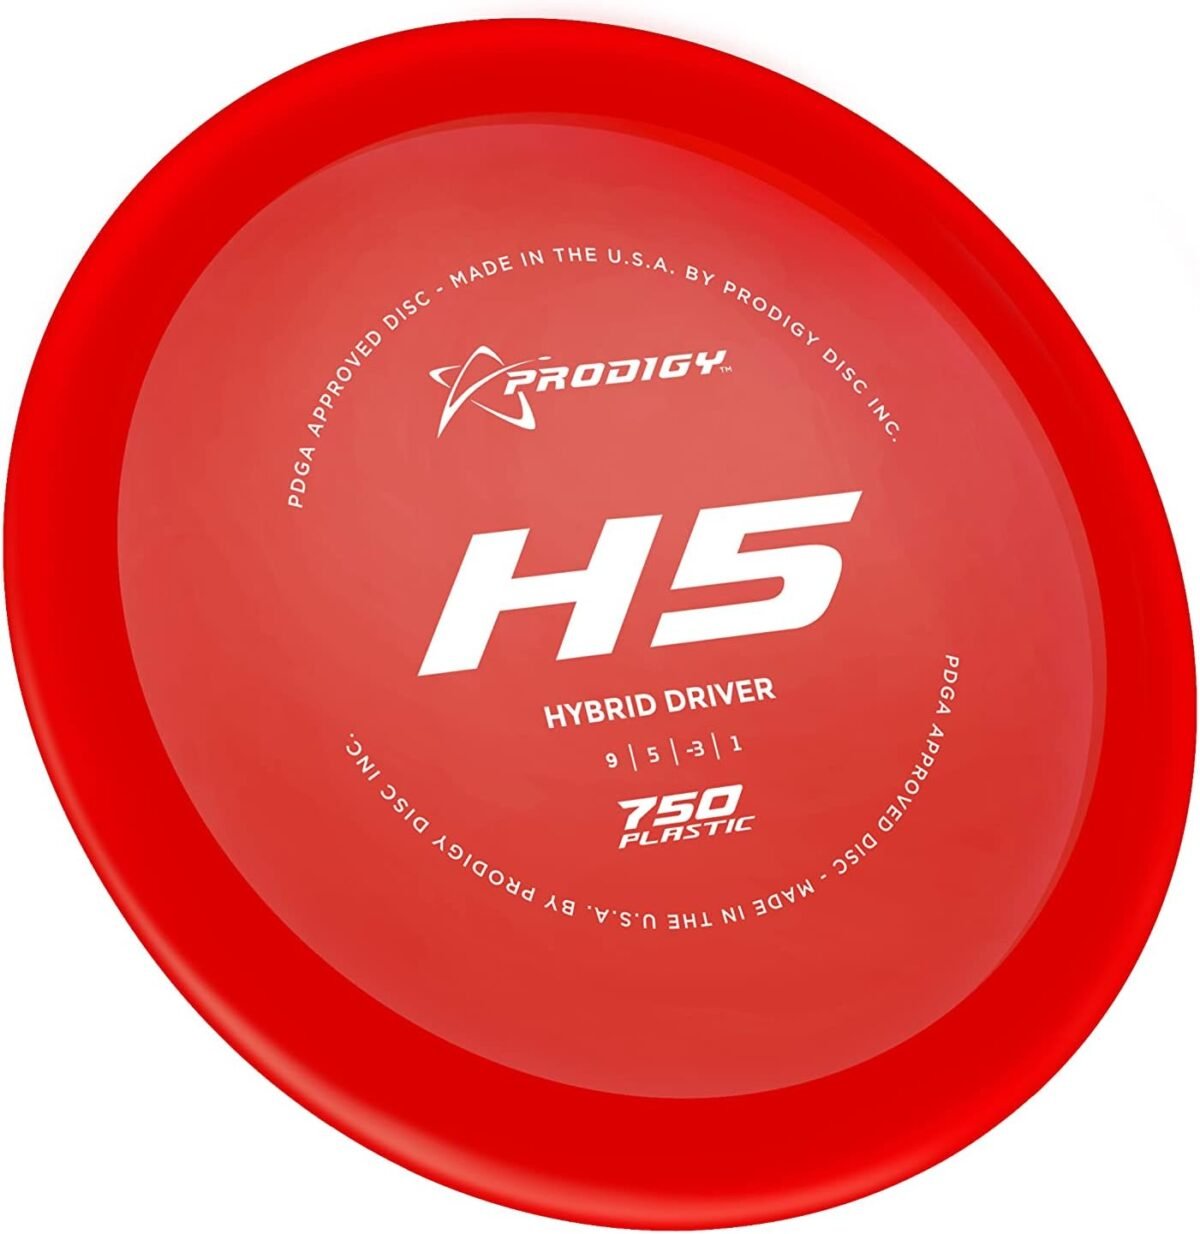 Comparing Professional Disc Golf Drivers: Yikun, Prodigy, and Dynamic Discs